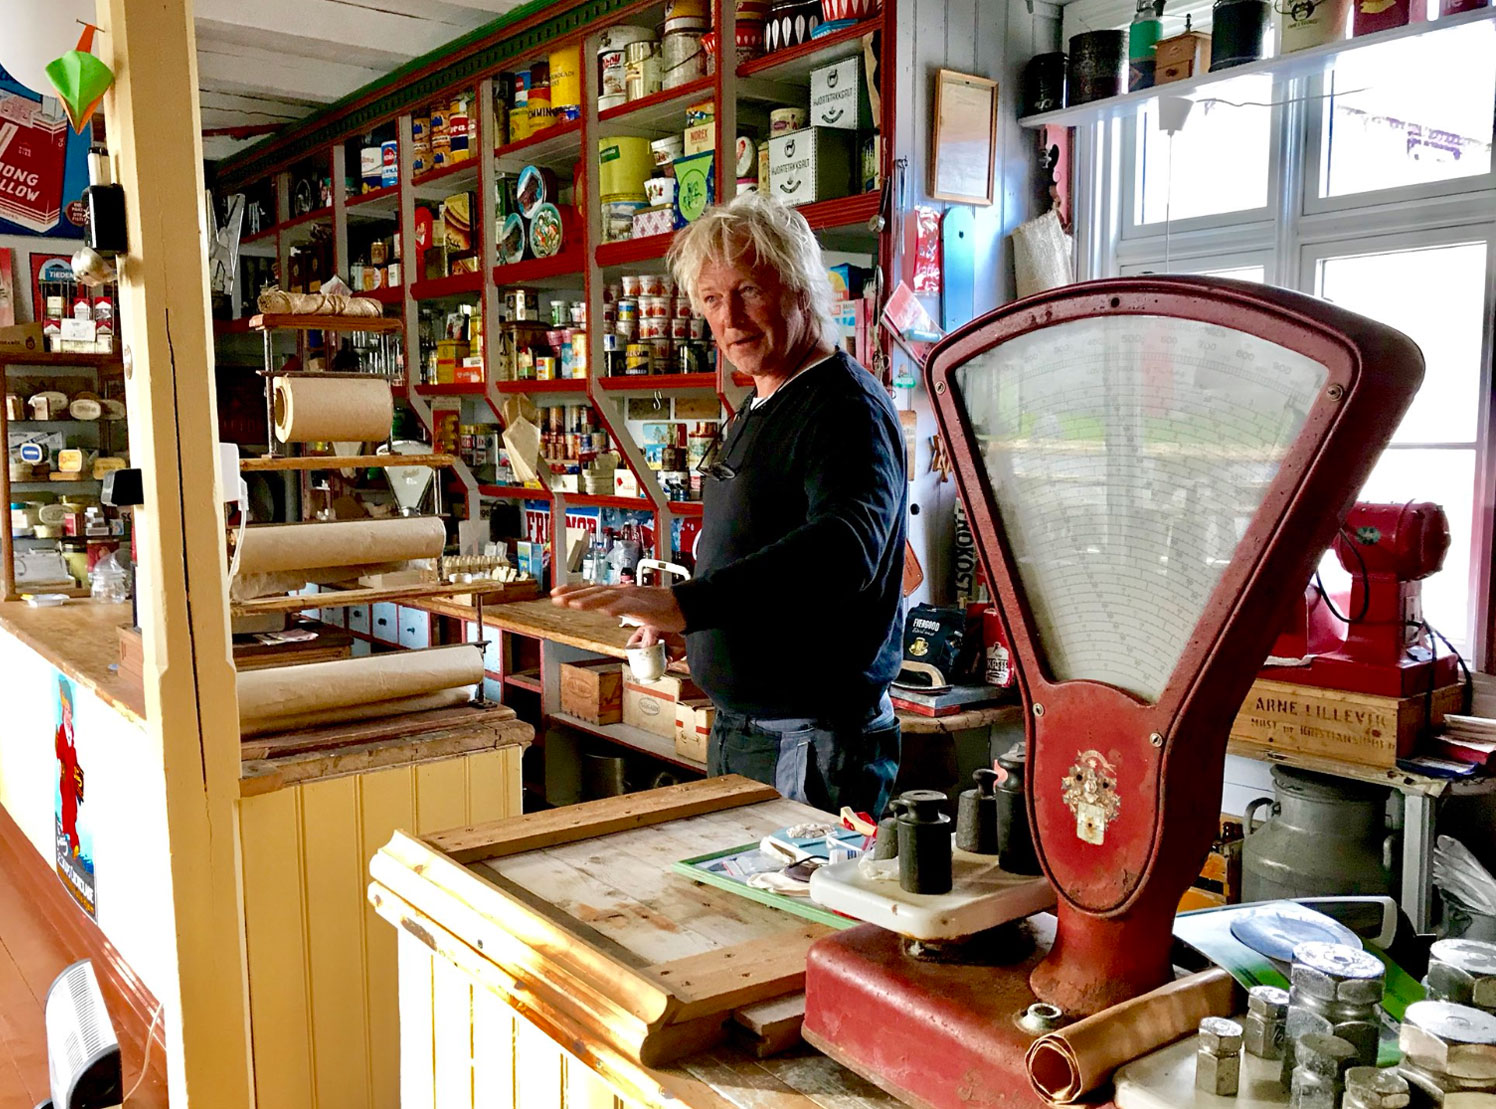 This entrepreneur has loving restored an old house, a shop, a post office and other buildings that are open to the public in the summer